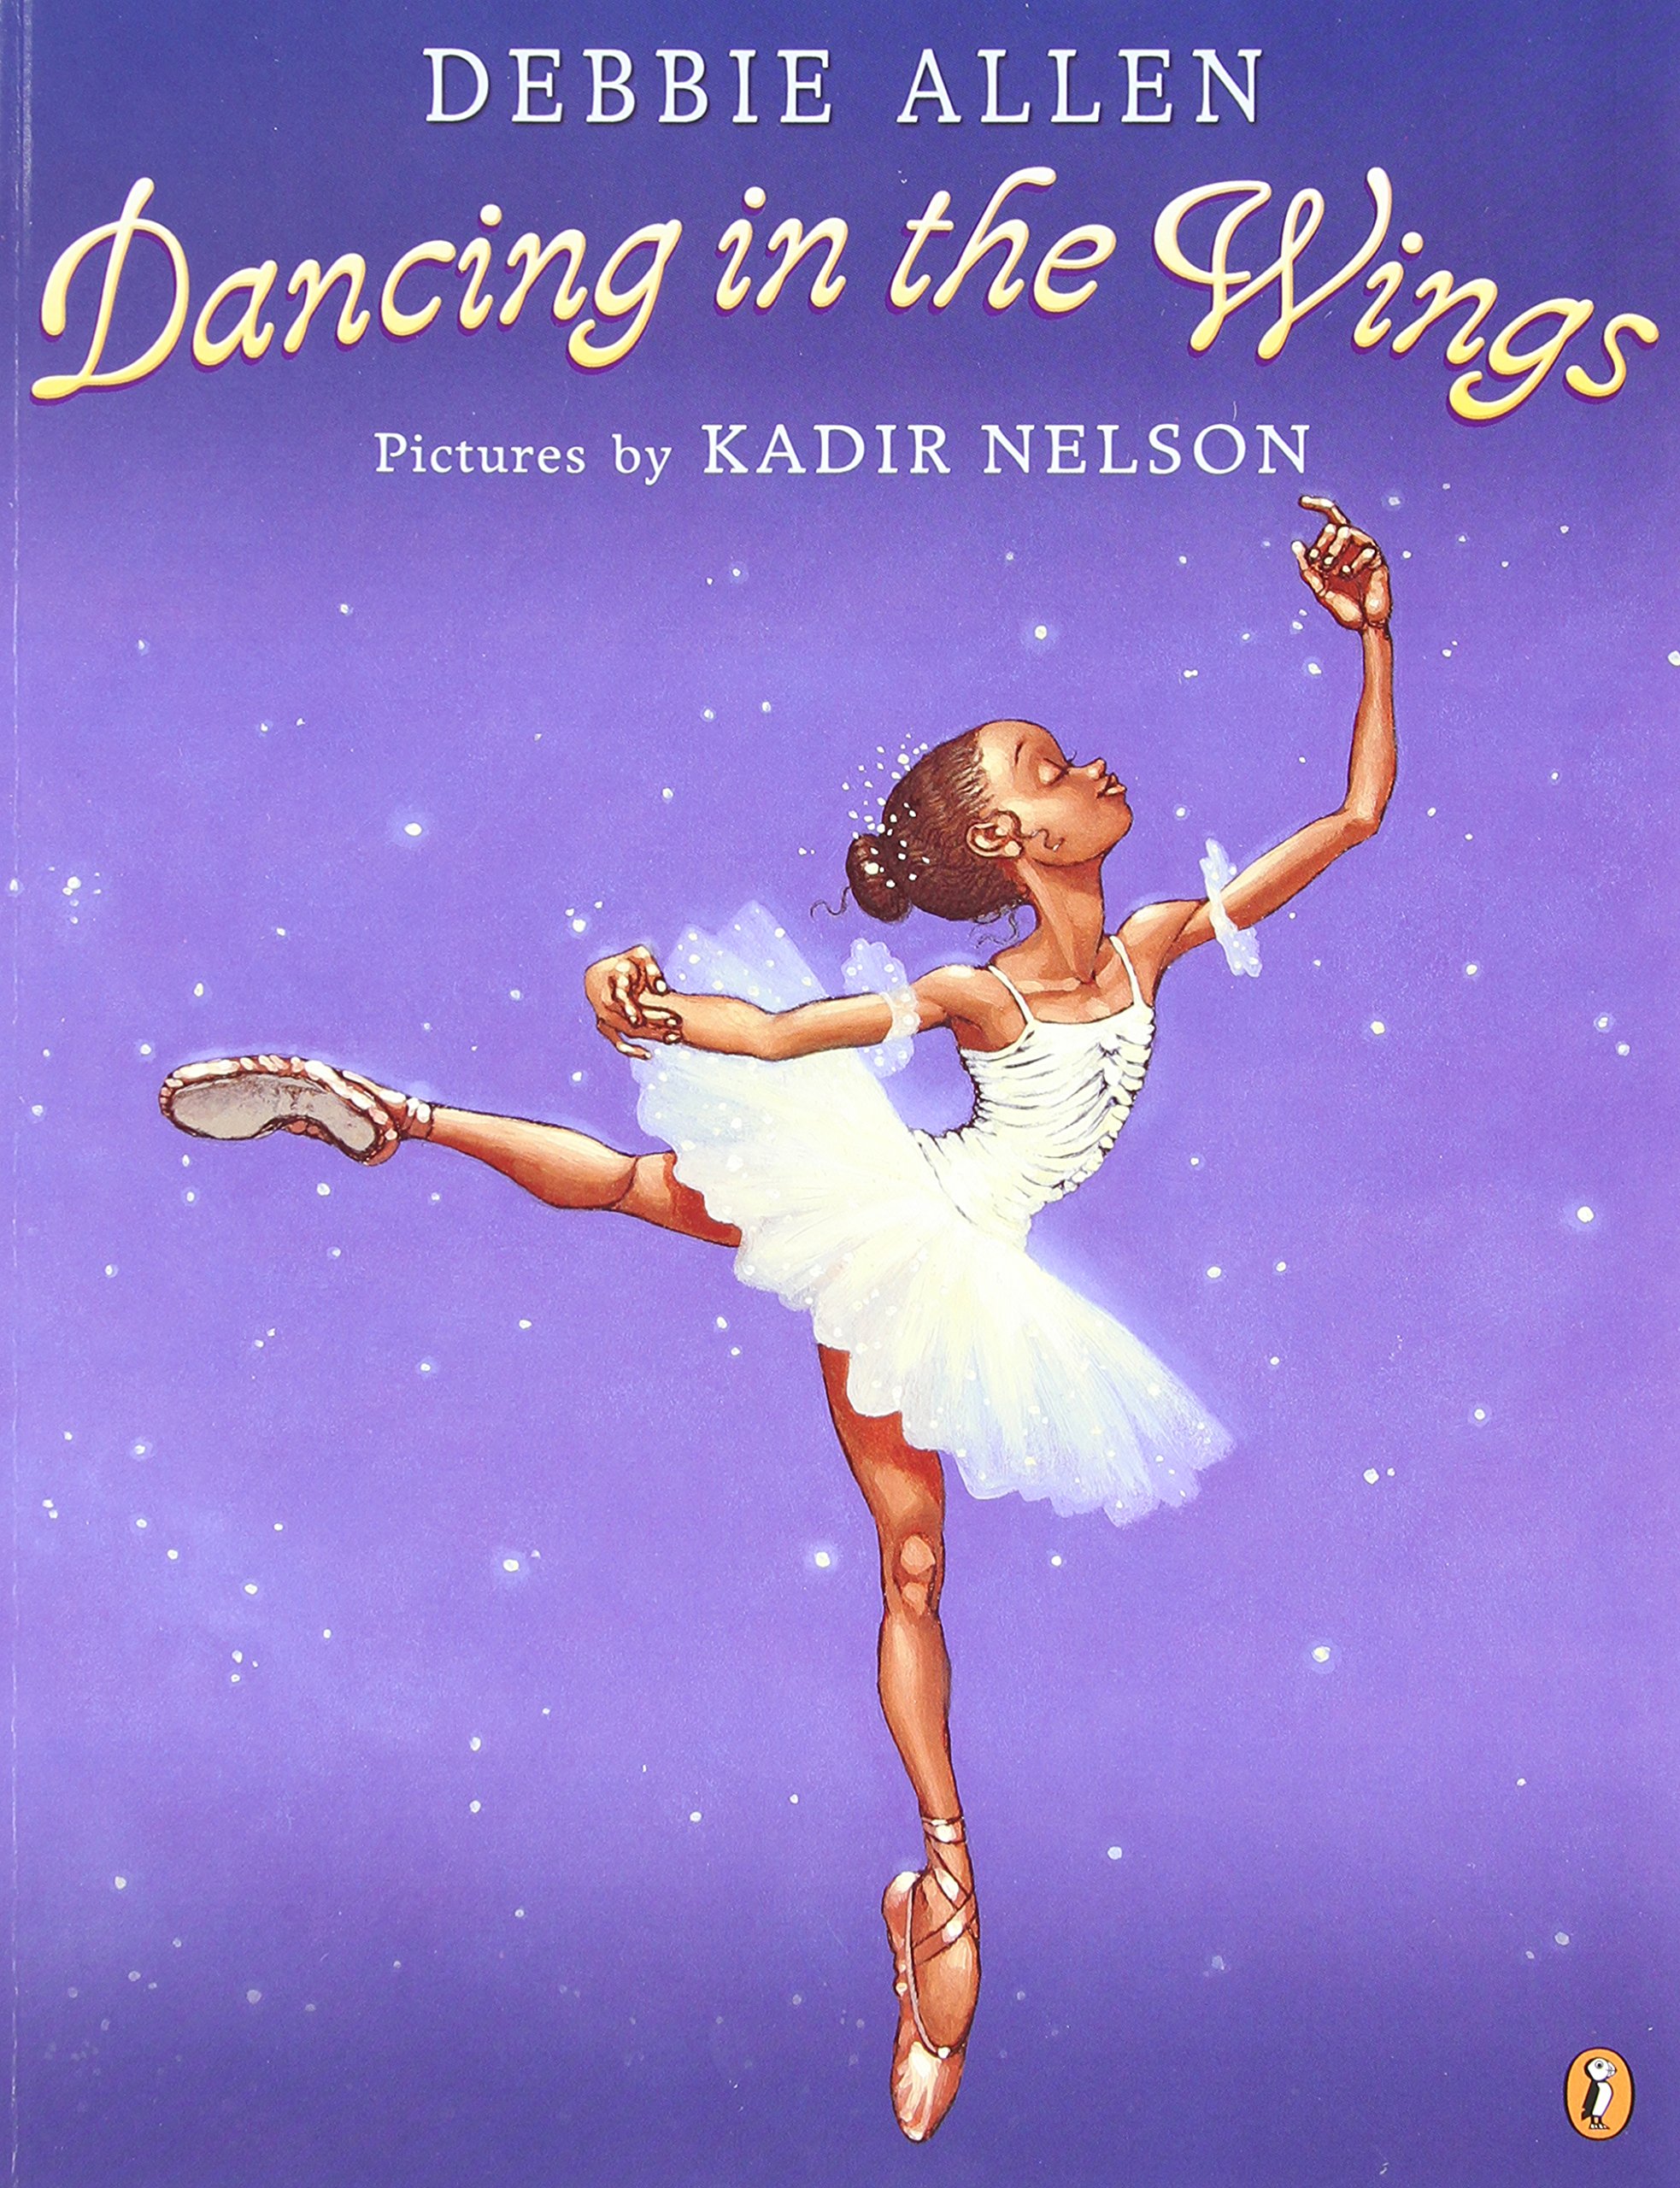 Banyan handle Udløbet 15 Children & Young Adult Books That Feature Black Ballerinas | Black  Children's Books and Authors